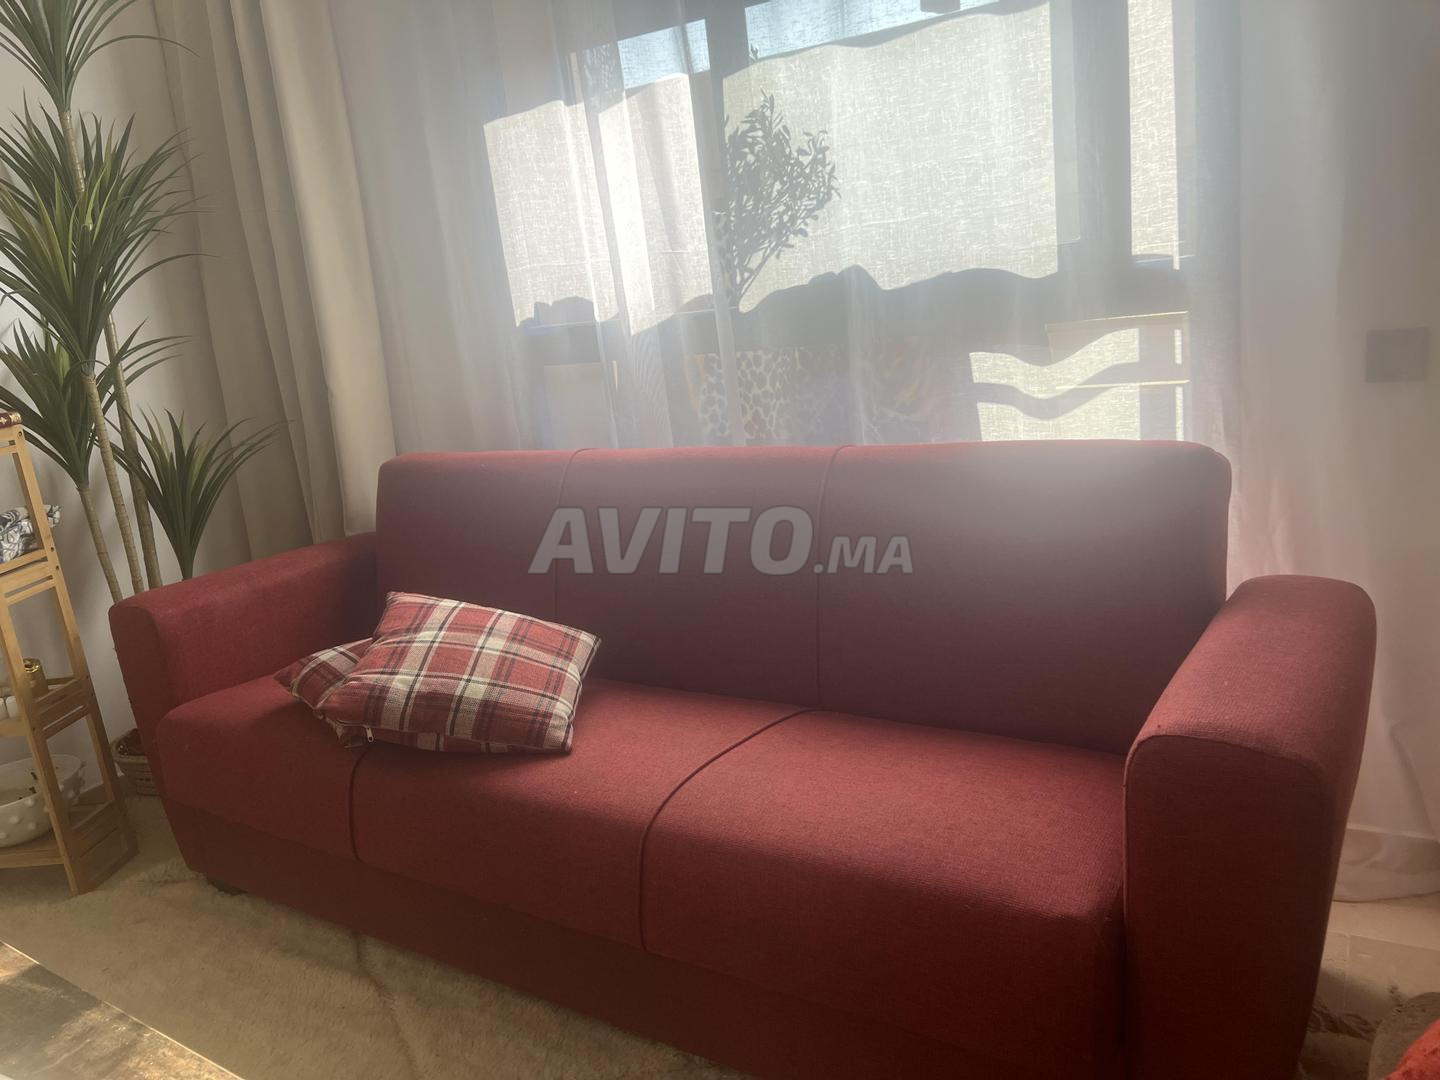 https://content.avito.ma/classifieds/images/10110655612?t=full_hd